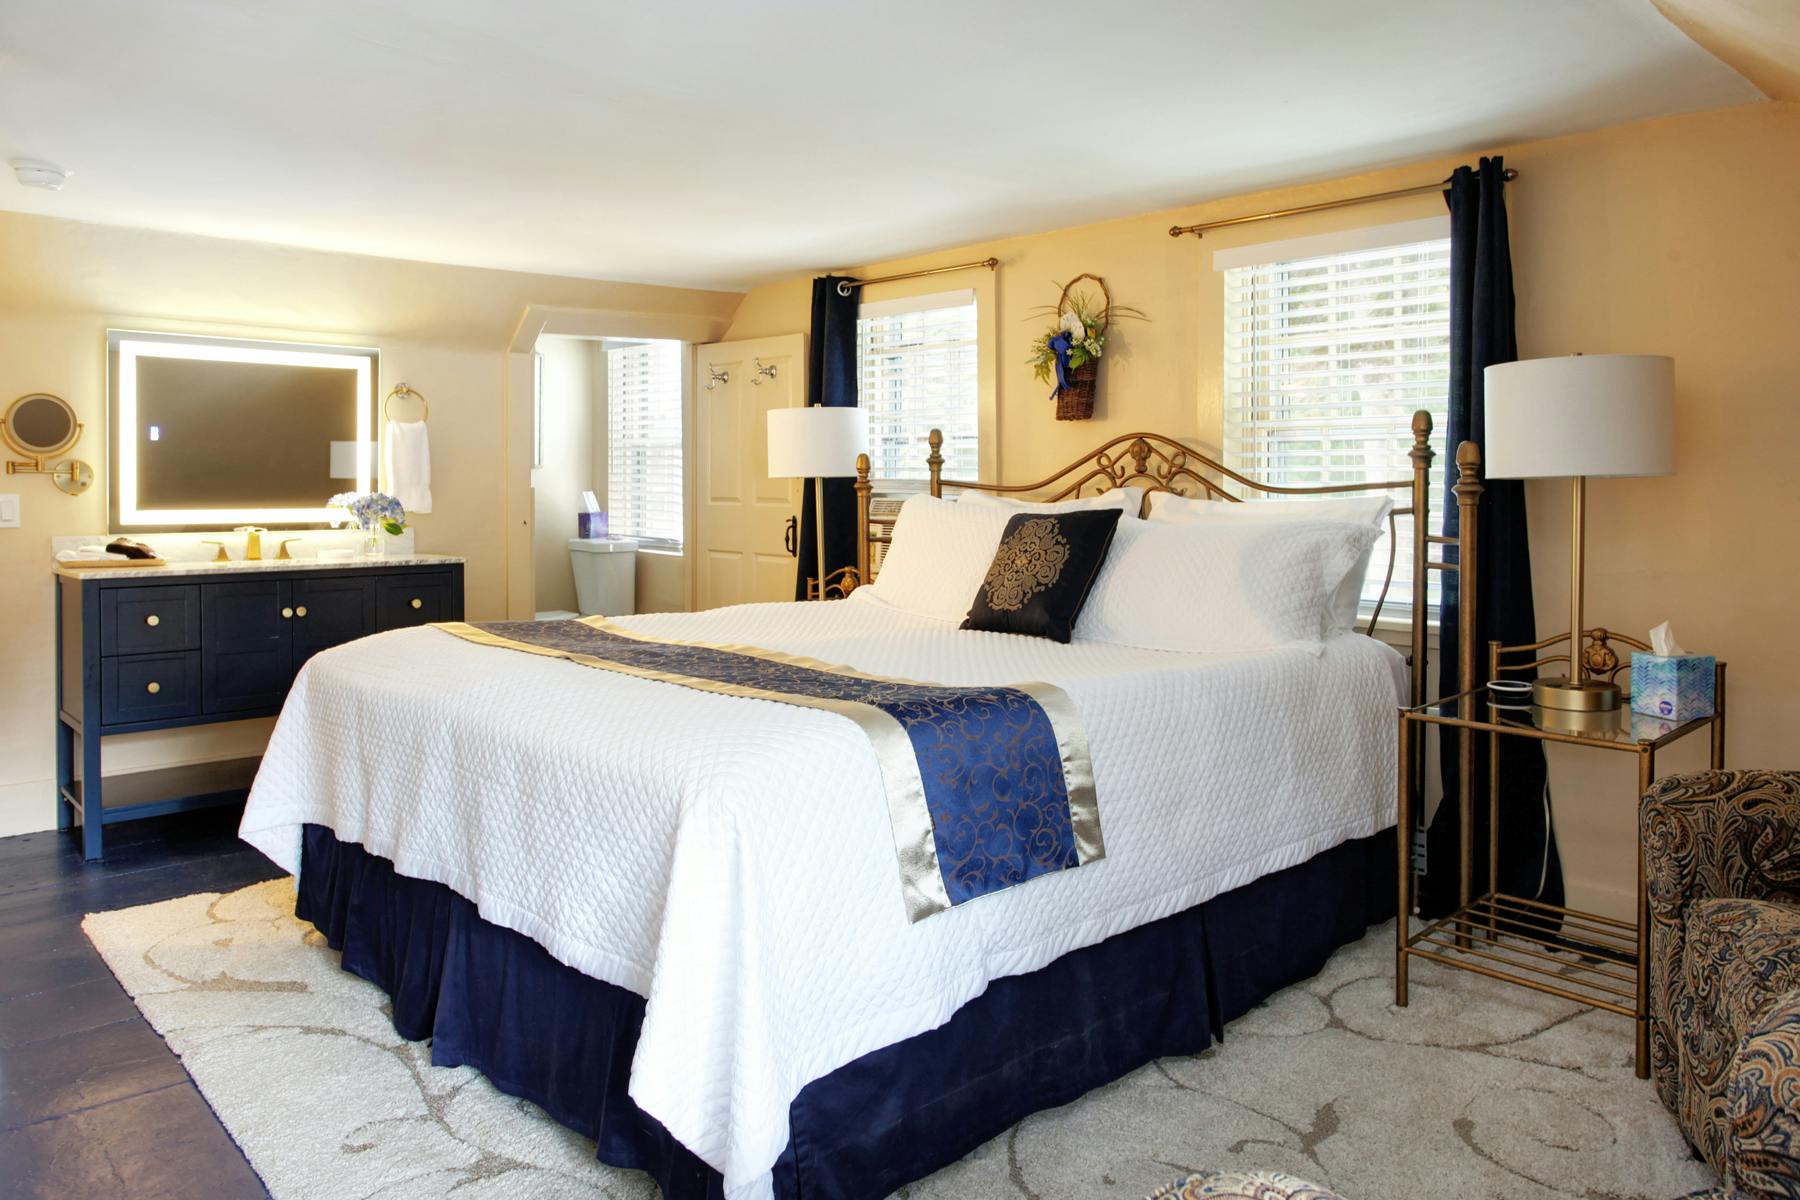 View of bed with white and navy bedding, end tables with lamps, wooden navy bureau with mirror, and neutral plush area rug